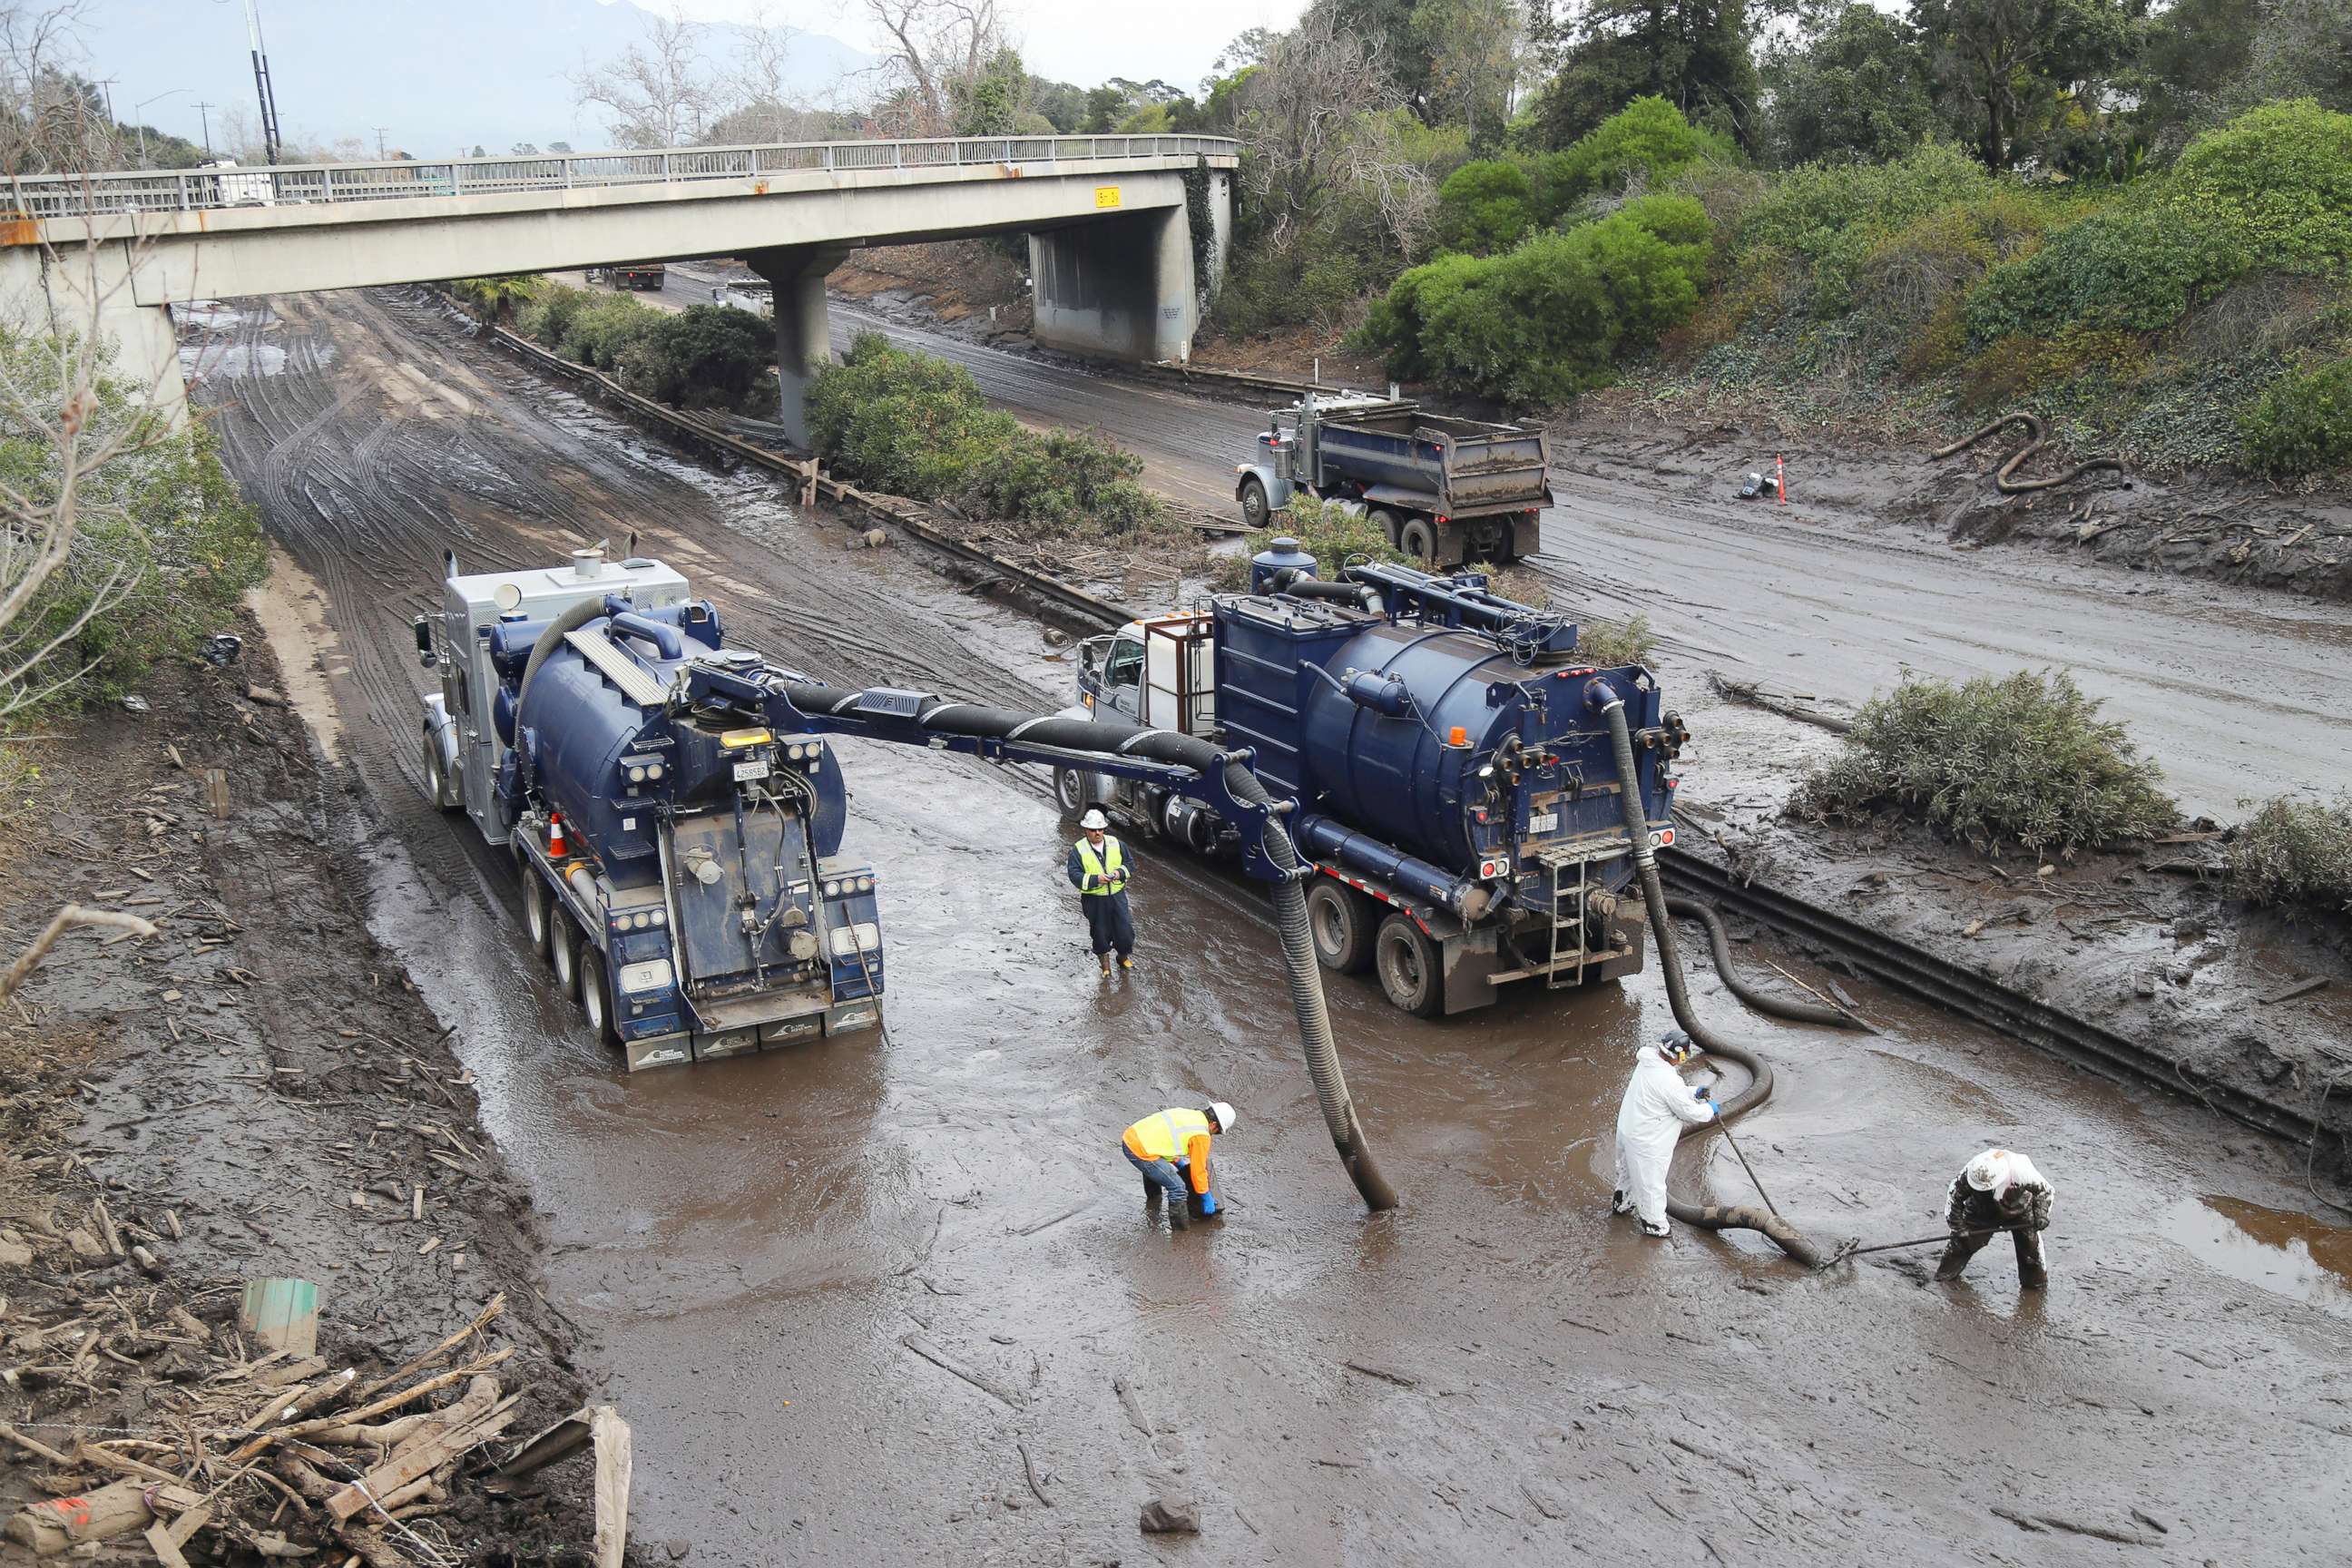 PHOTO: Vacuum trucks are used  to clear the muck left by the mudslide from Highway 101 in Montecito, Calif., Jan. 15, 2018.